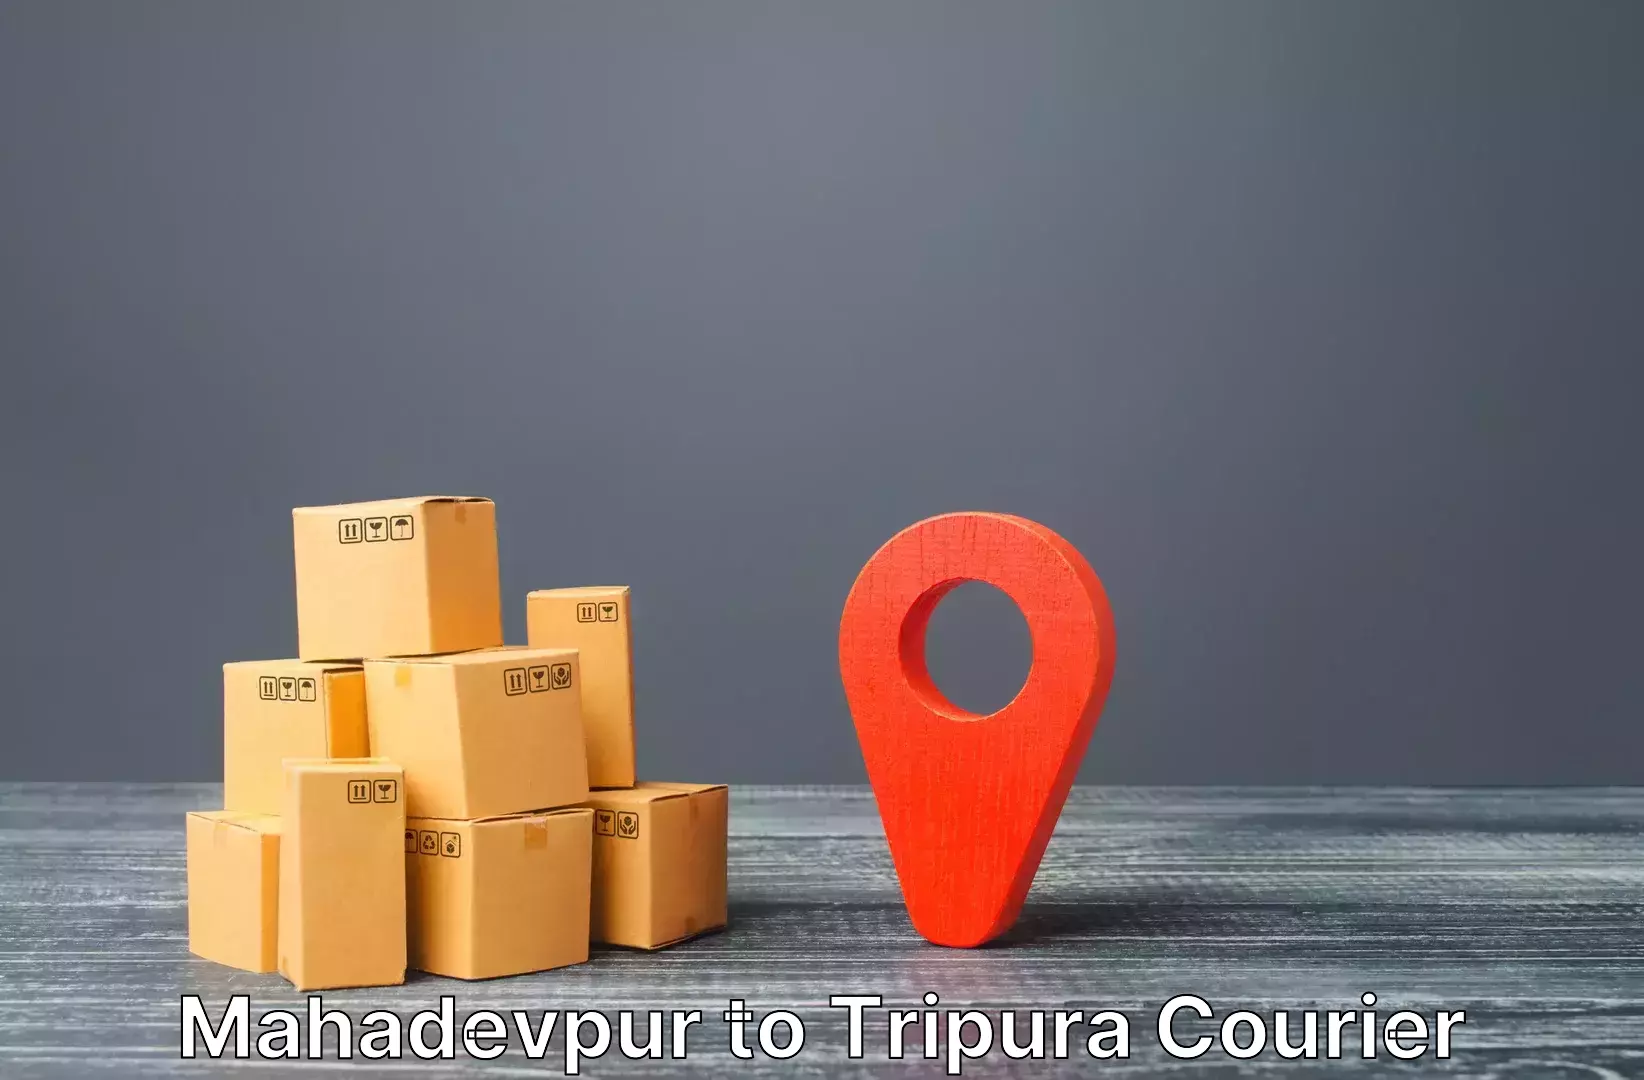 Professional baggage delivery Mahadevpur to Agartala